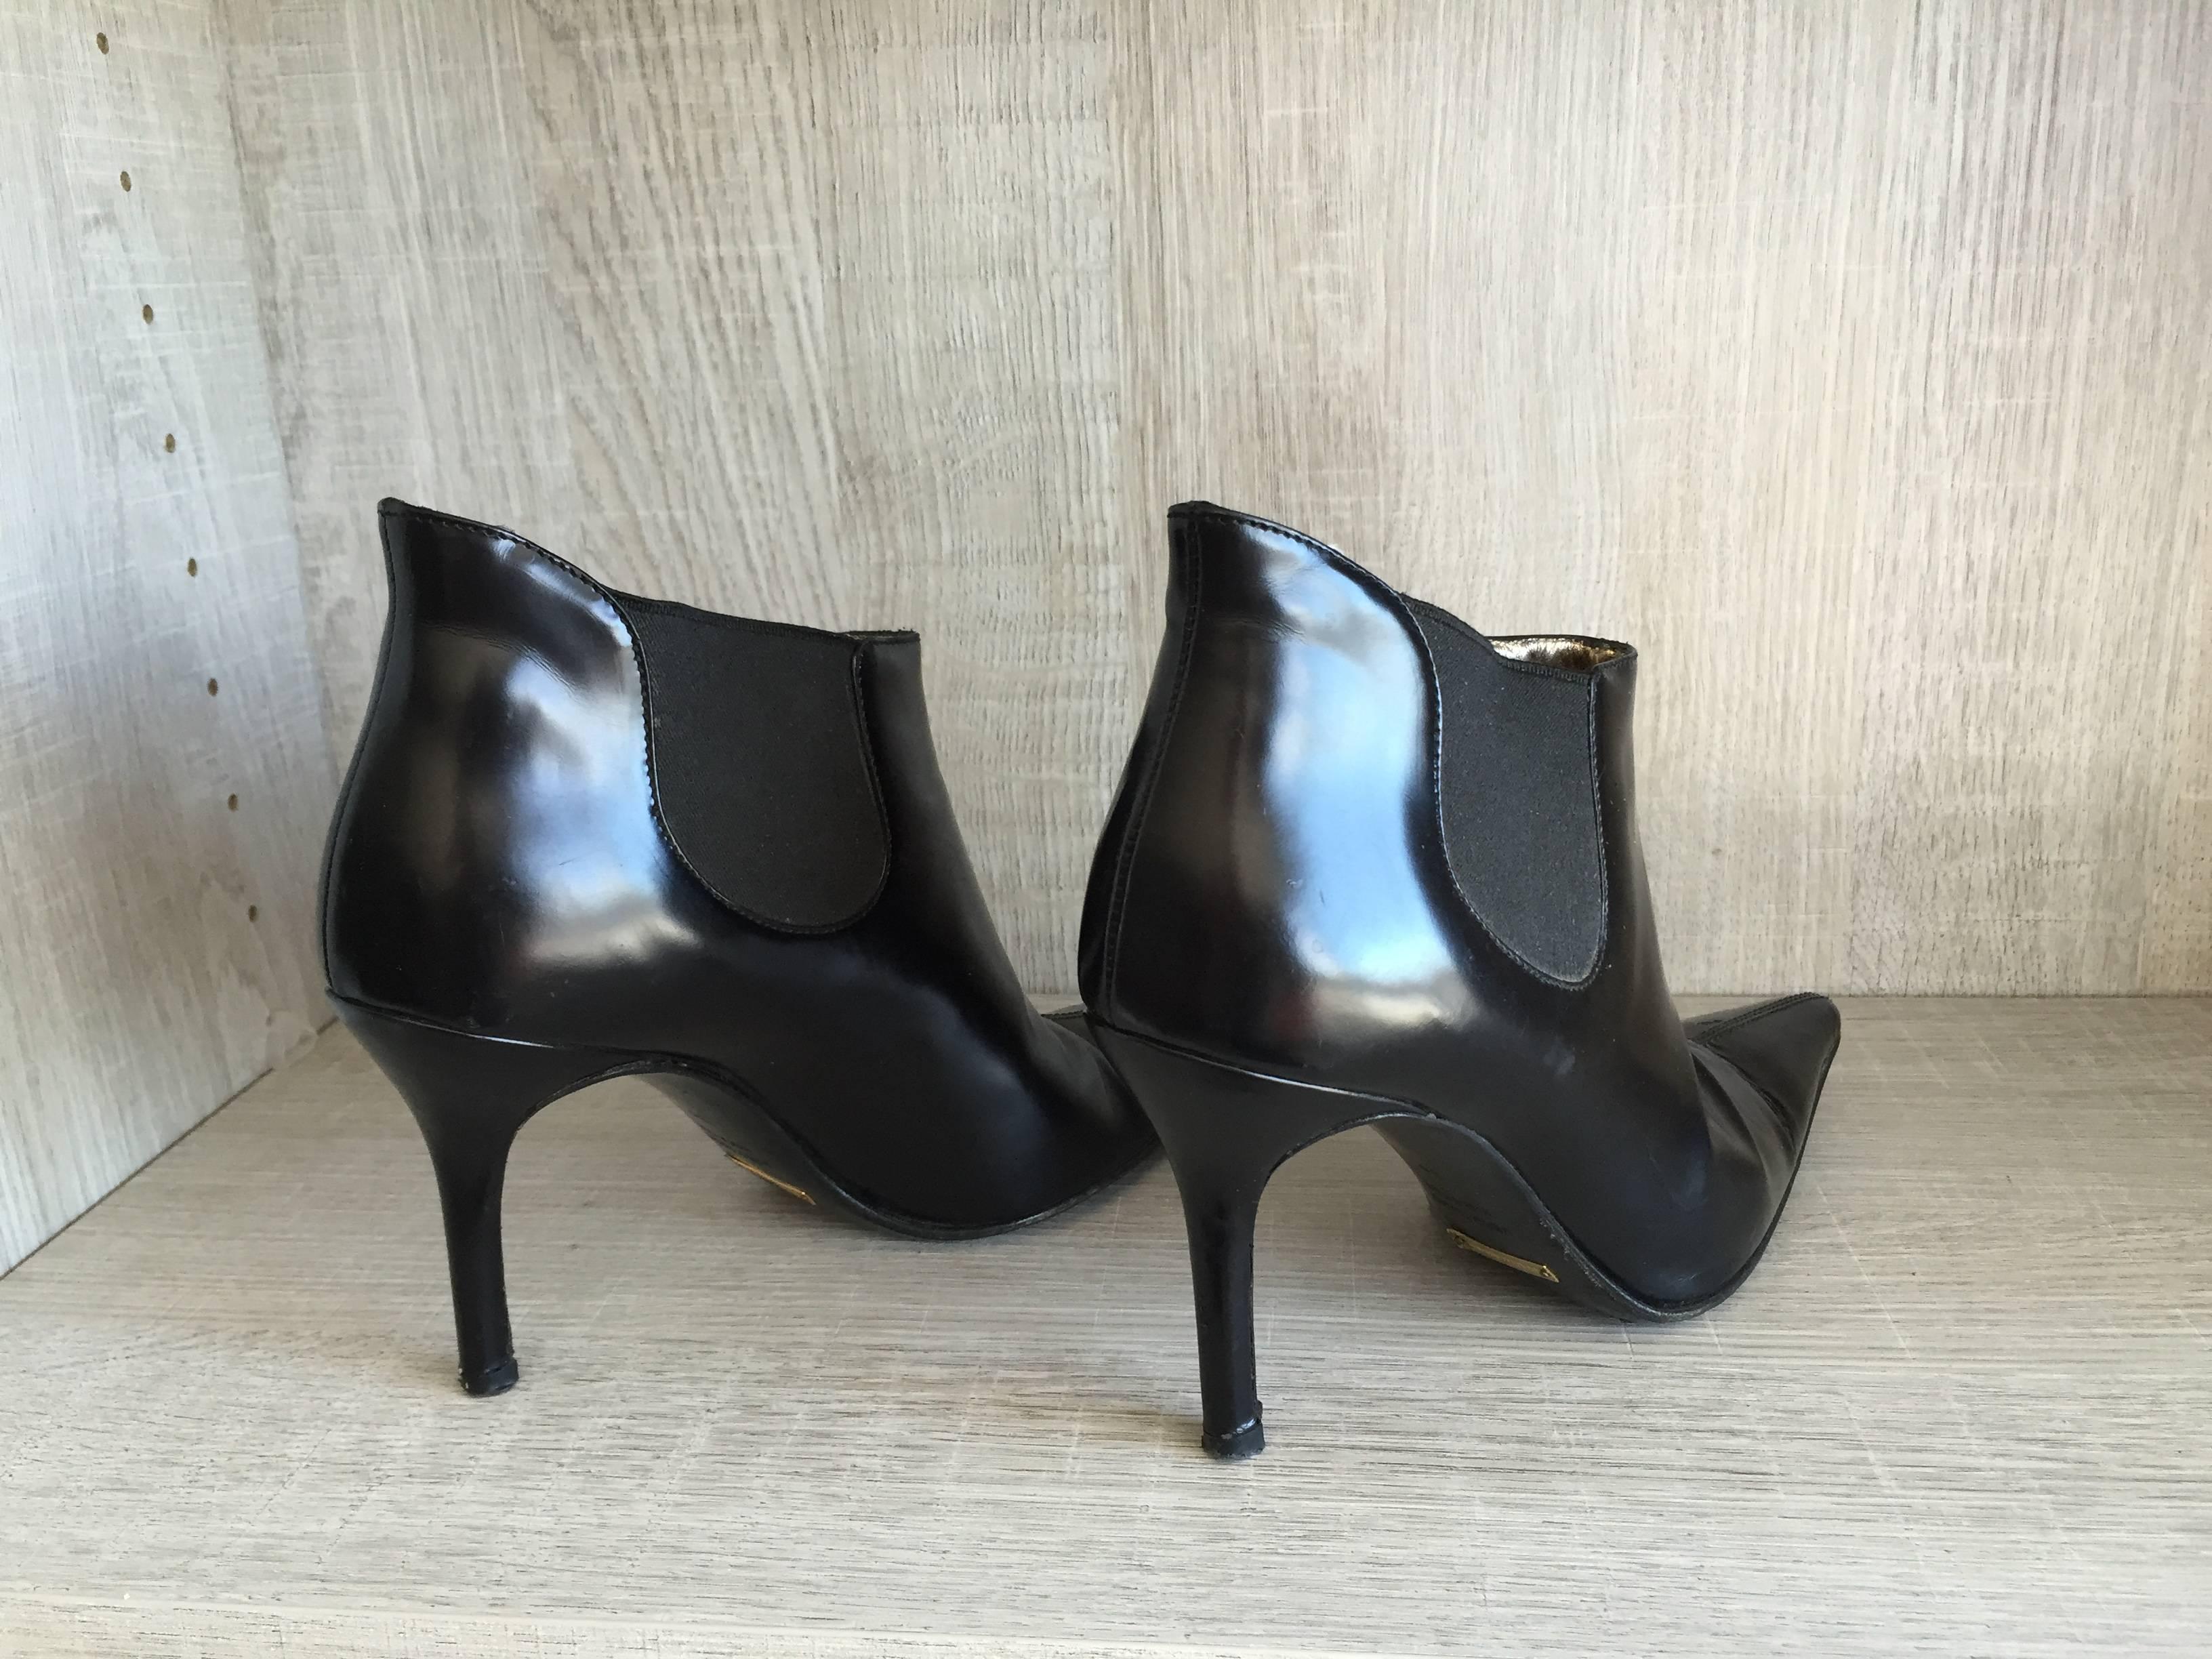 1990s Sex and the City Chic Dolce & Gabbana black leather ankle booties! Just the 'right amount' of point toe. Slender heel. Can easily be dressed up or down. Perfect with jeans, yet great with a dress, trousers or a skirt. 
Marked Size 36, which is